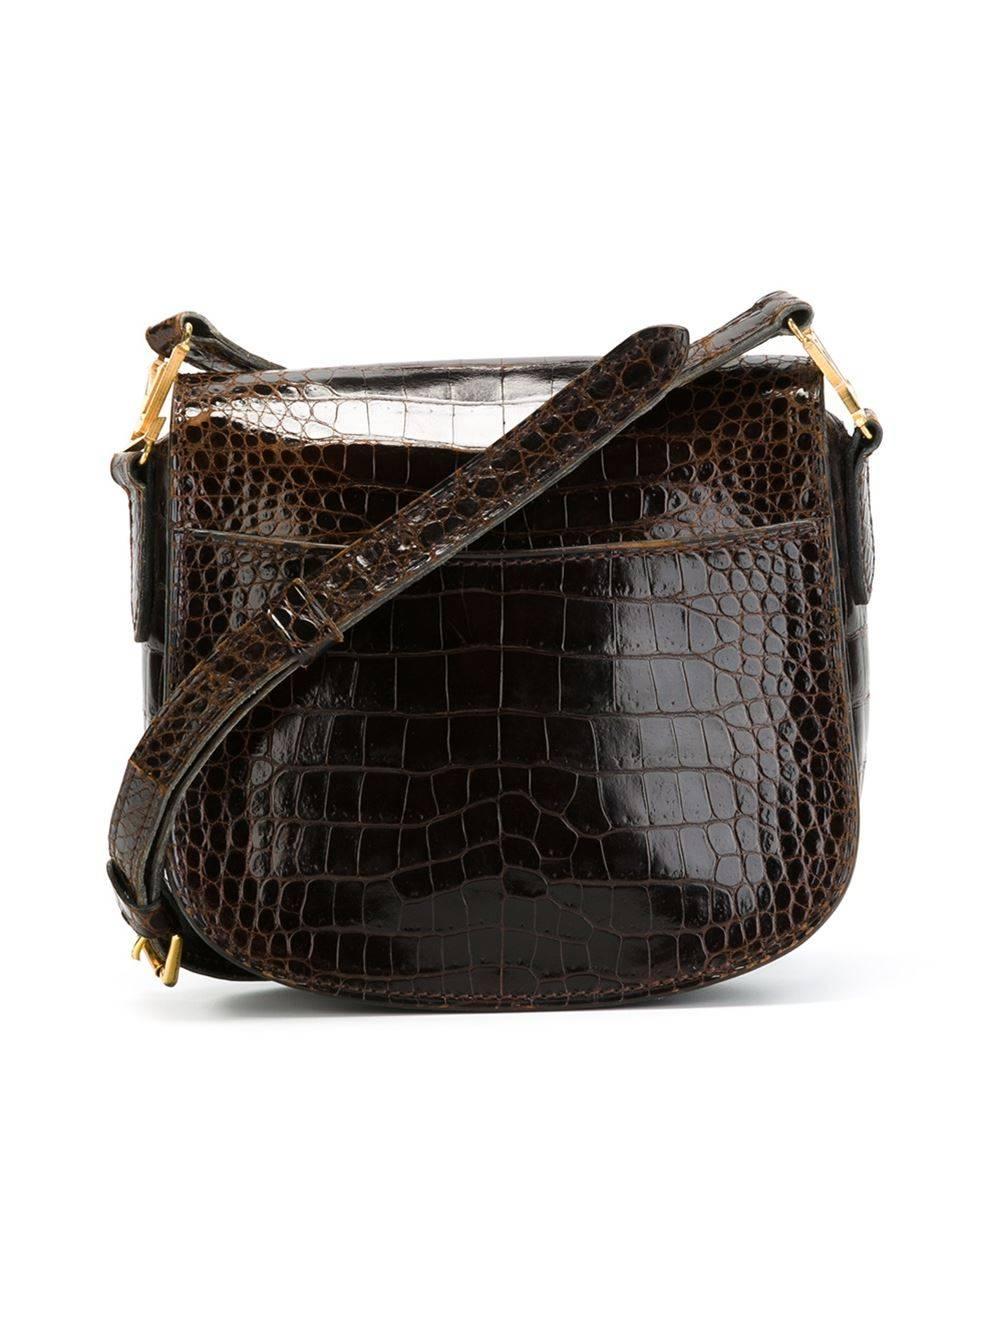 This vintage shoulder bag from Louis Vuitton features a shiny crocodile leather exterior, adjustable shoulder strap with logo detailing, gold-tone hardware, internal slit-pocket, and a snap closure.

Colour: Brown

Material: Crocodile